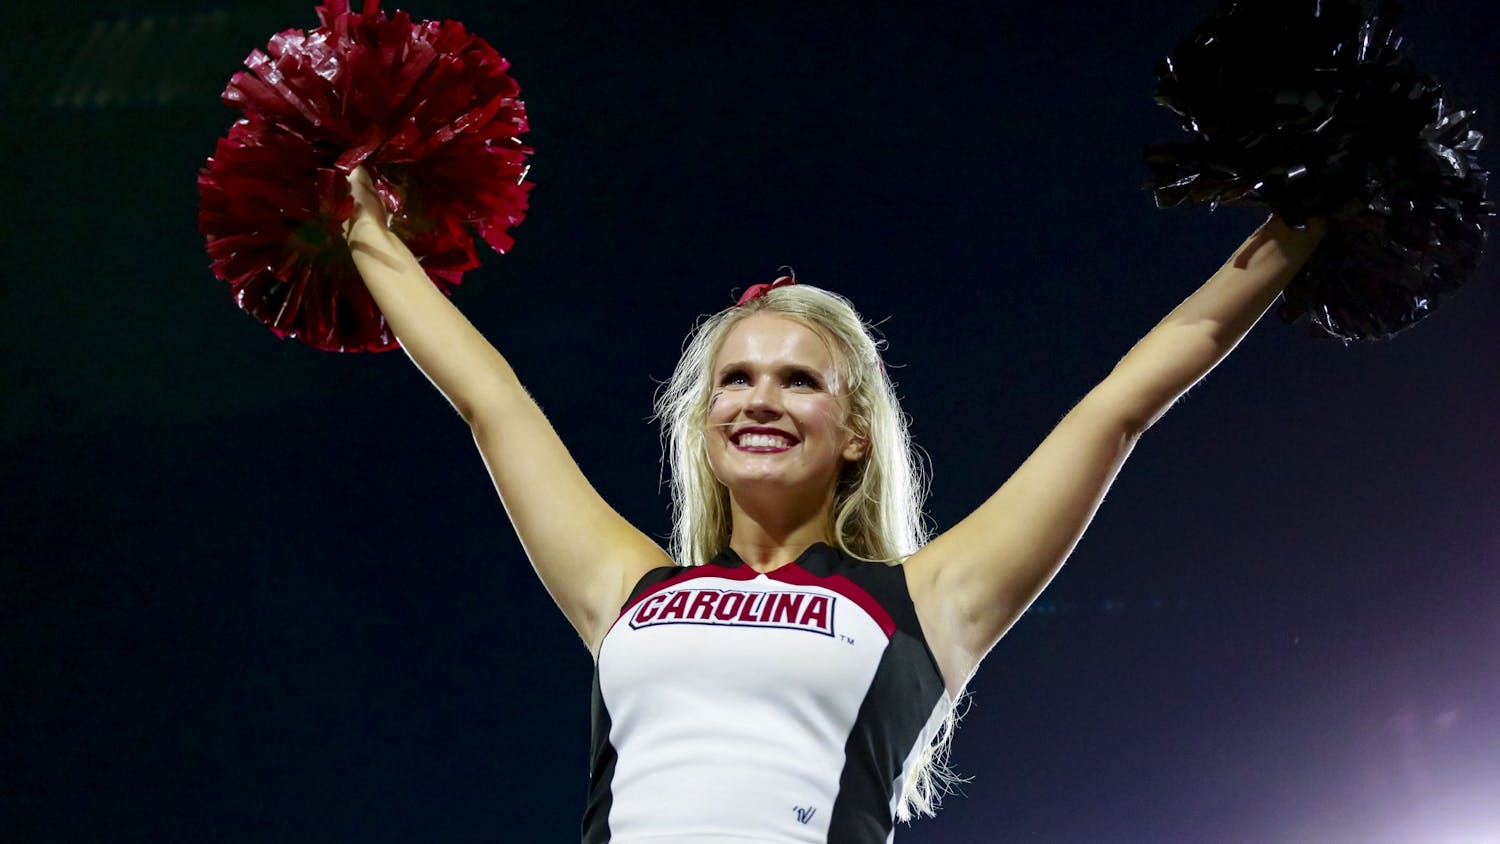 A Gamecock cheerleader performs a stunt during South Carolina's game against Georgia on September 18, 2021.